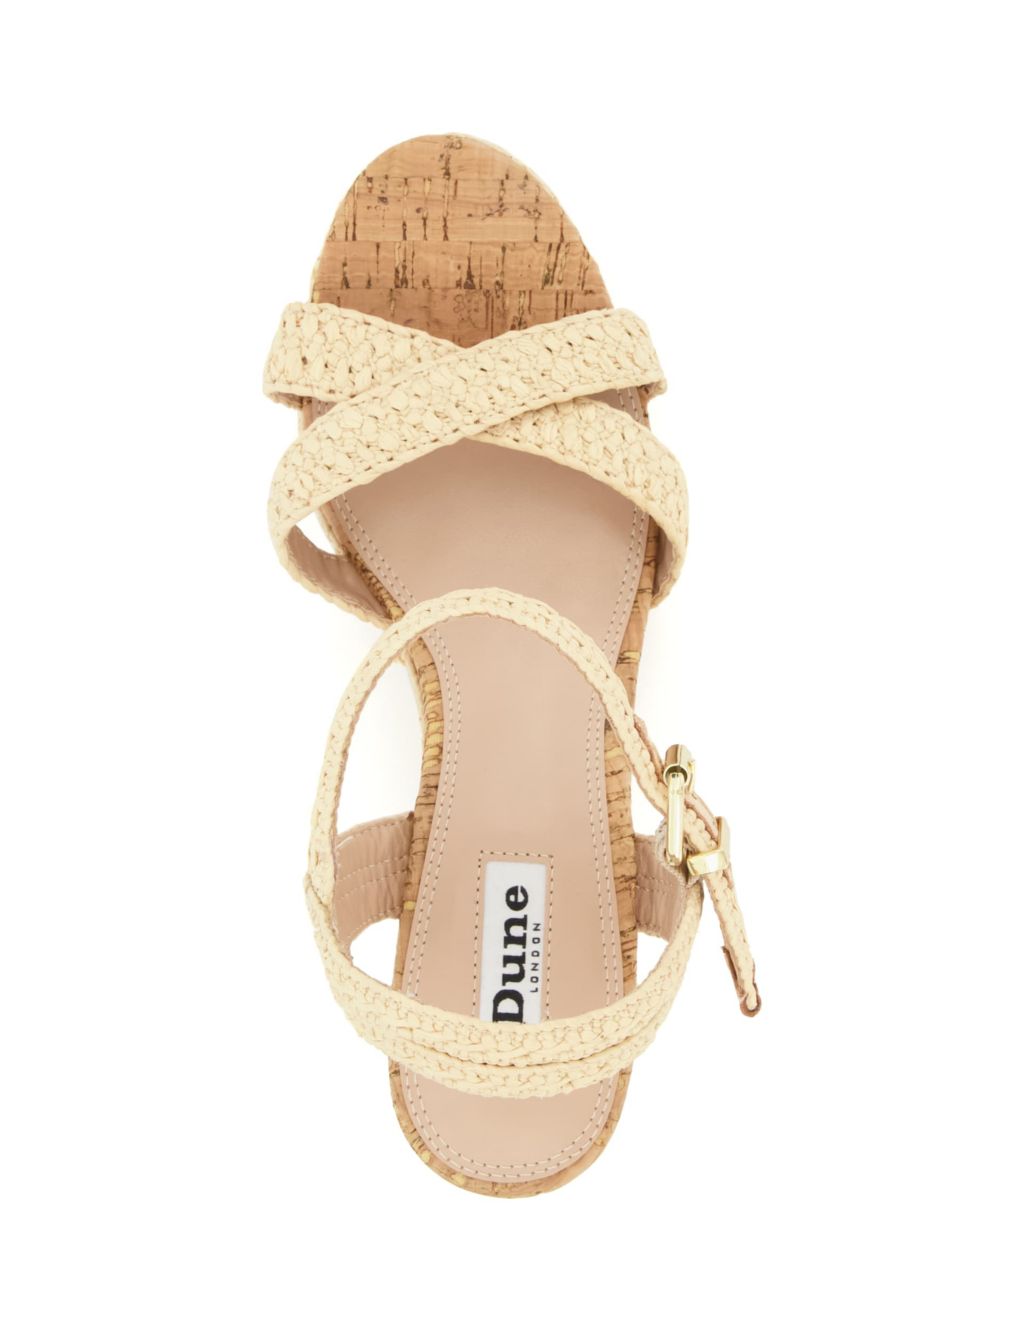 Woven Crossover Ankle Strap Wedge Sandals image 3